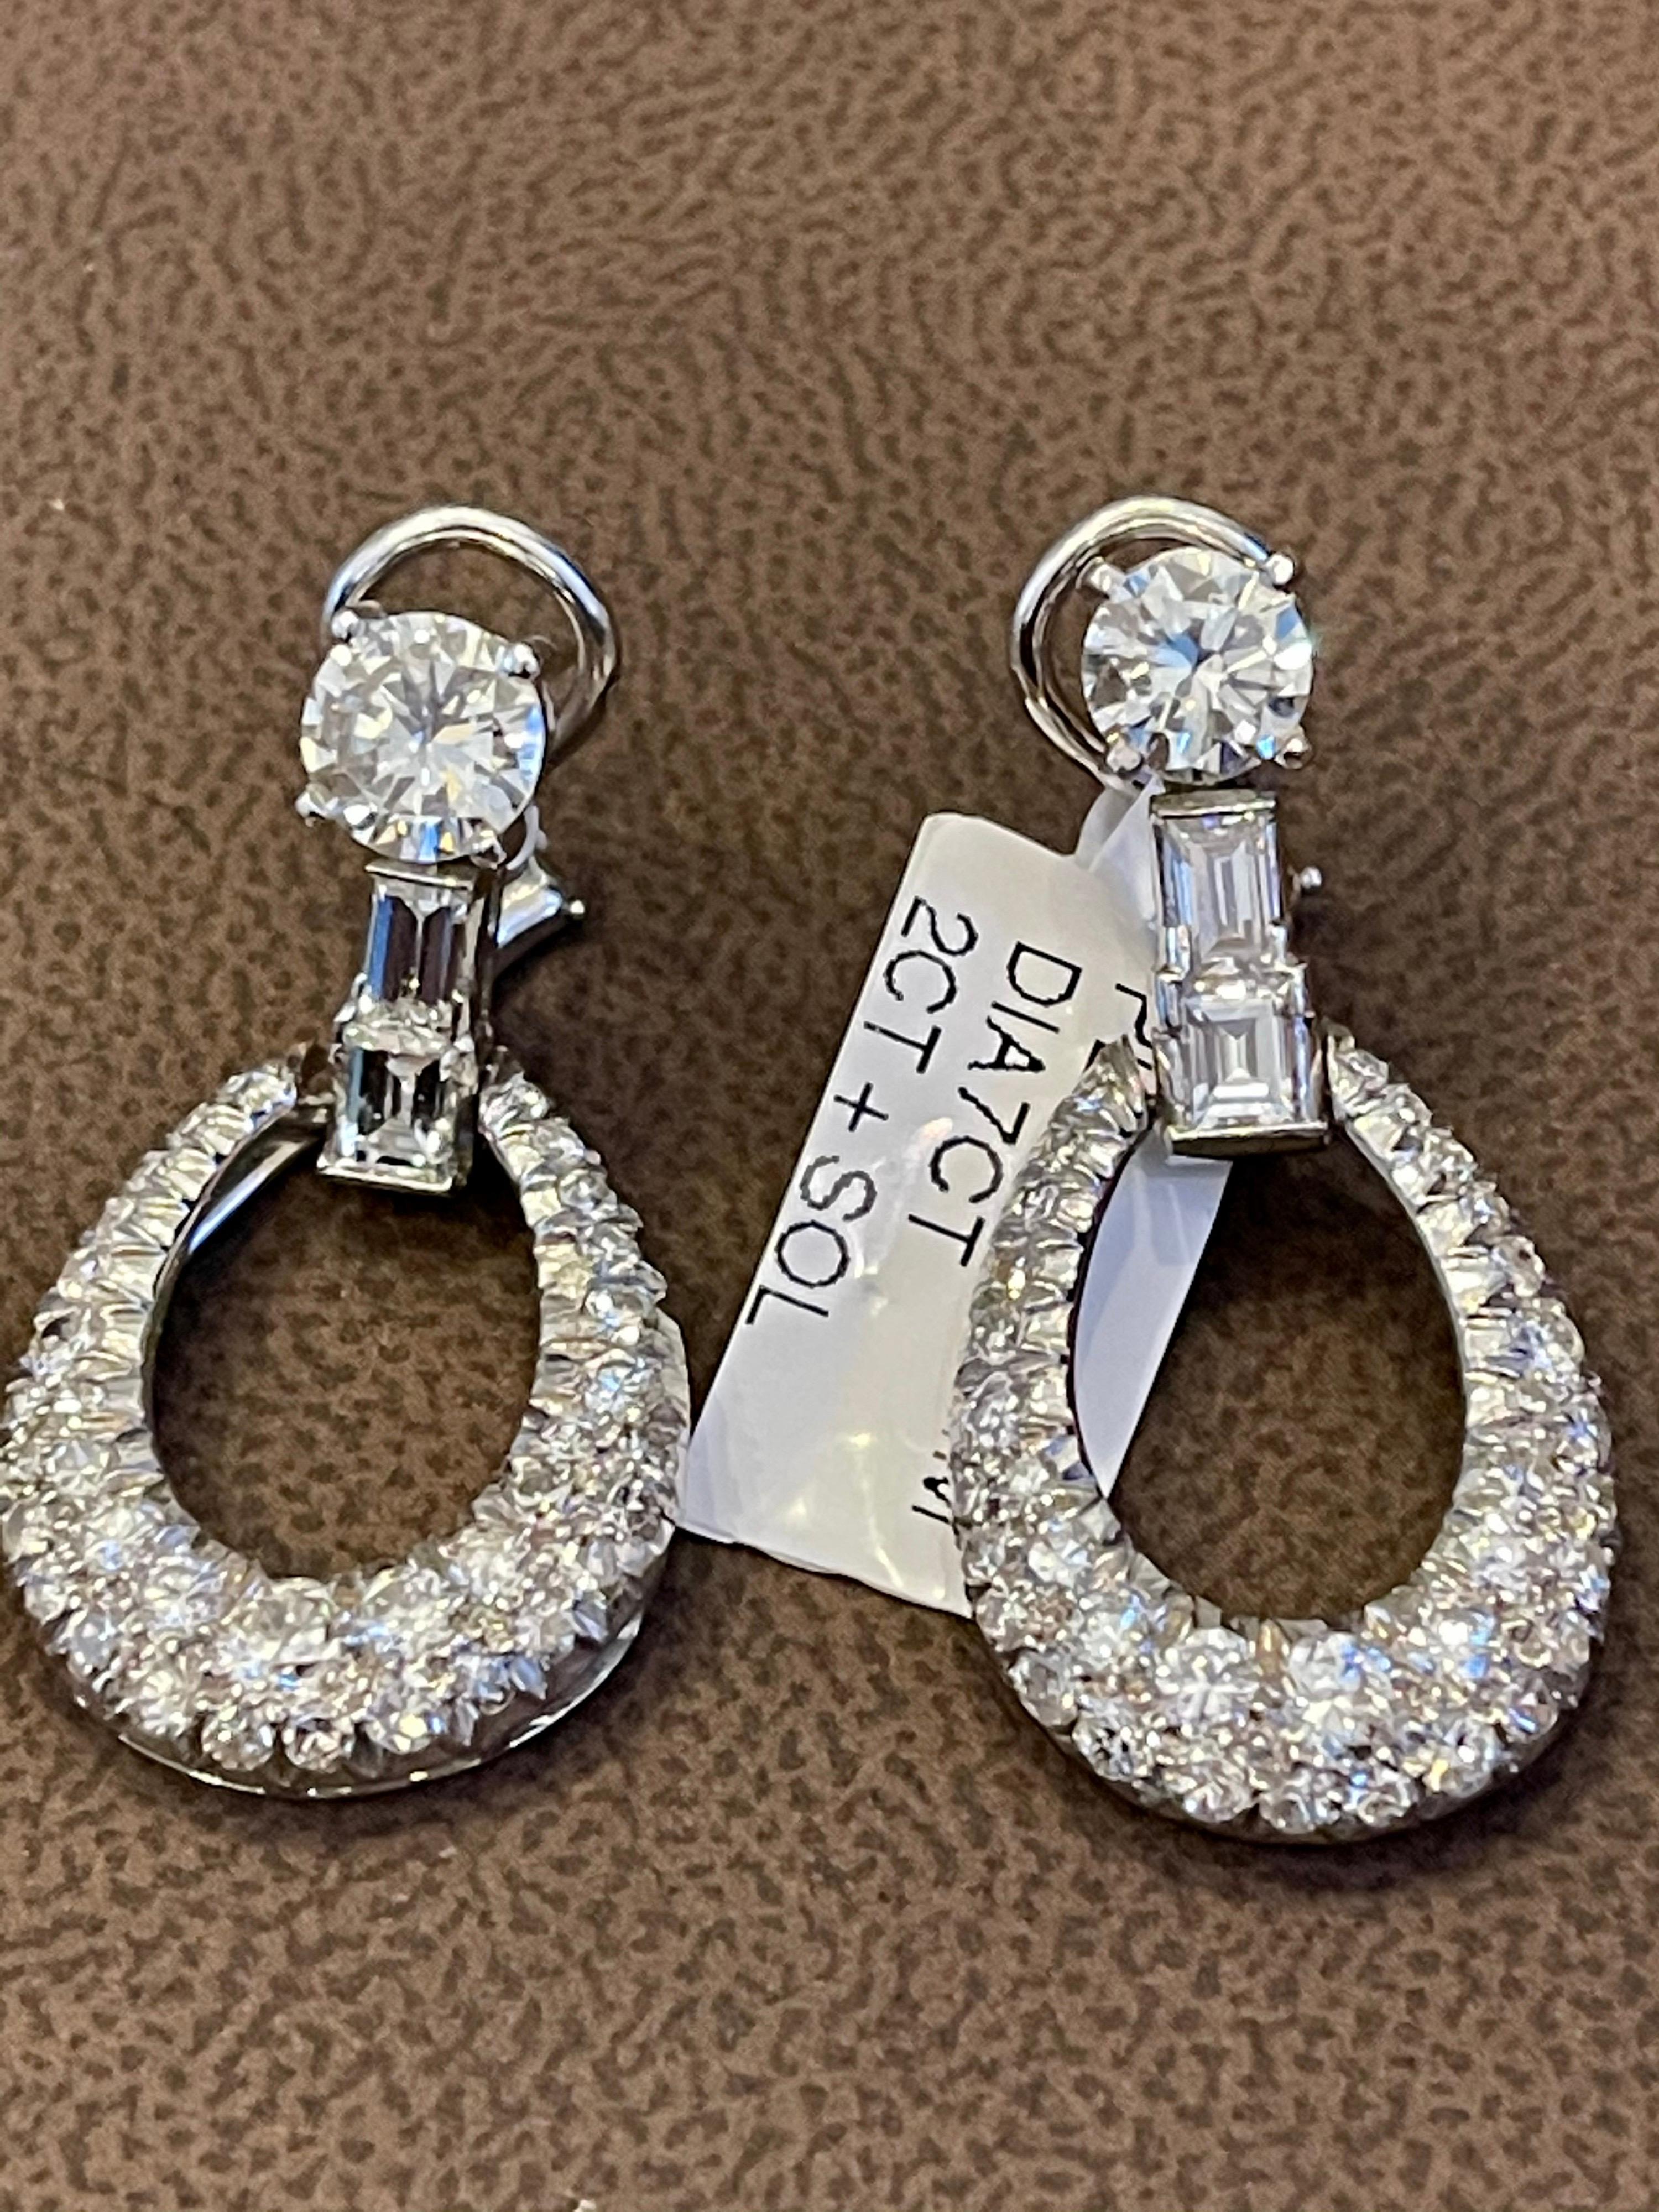 1950s 7 Ct Diamond Drop Cocktail Earrings Platinum with 2 Ct Solitaire Diamond For Sale 3